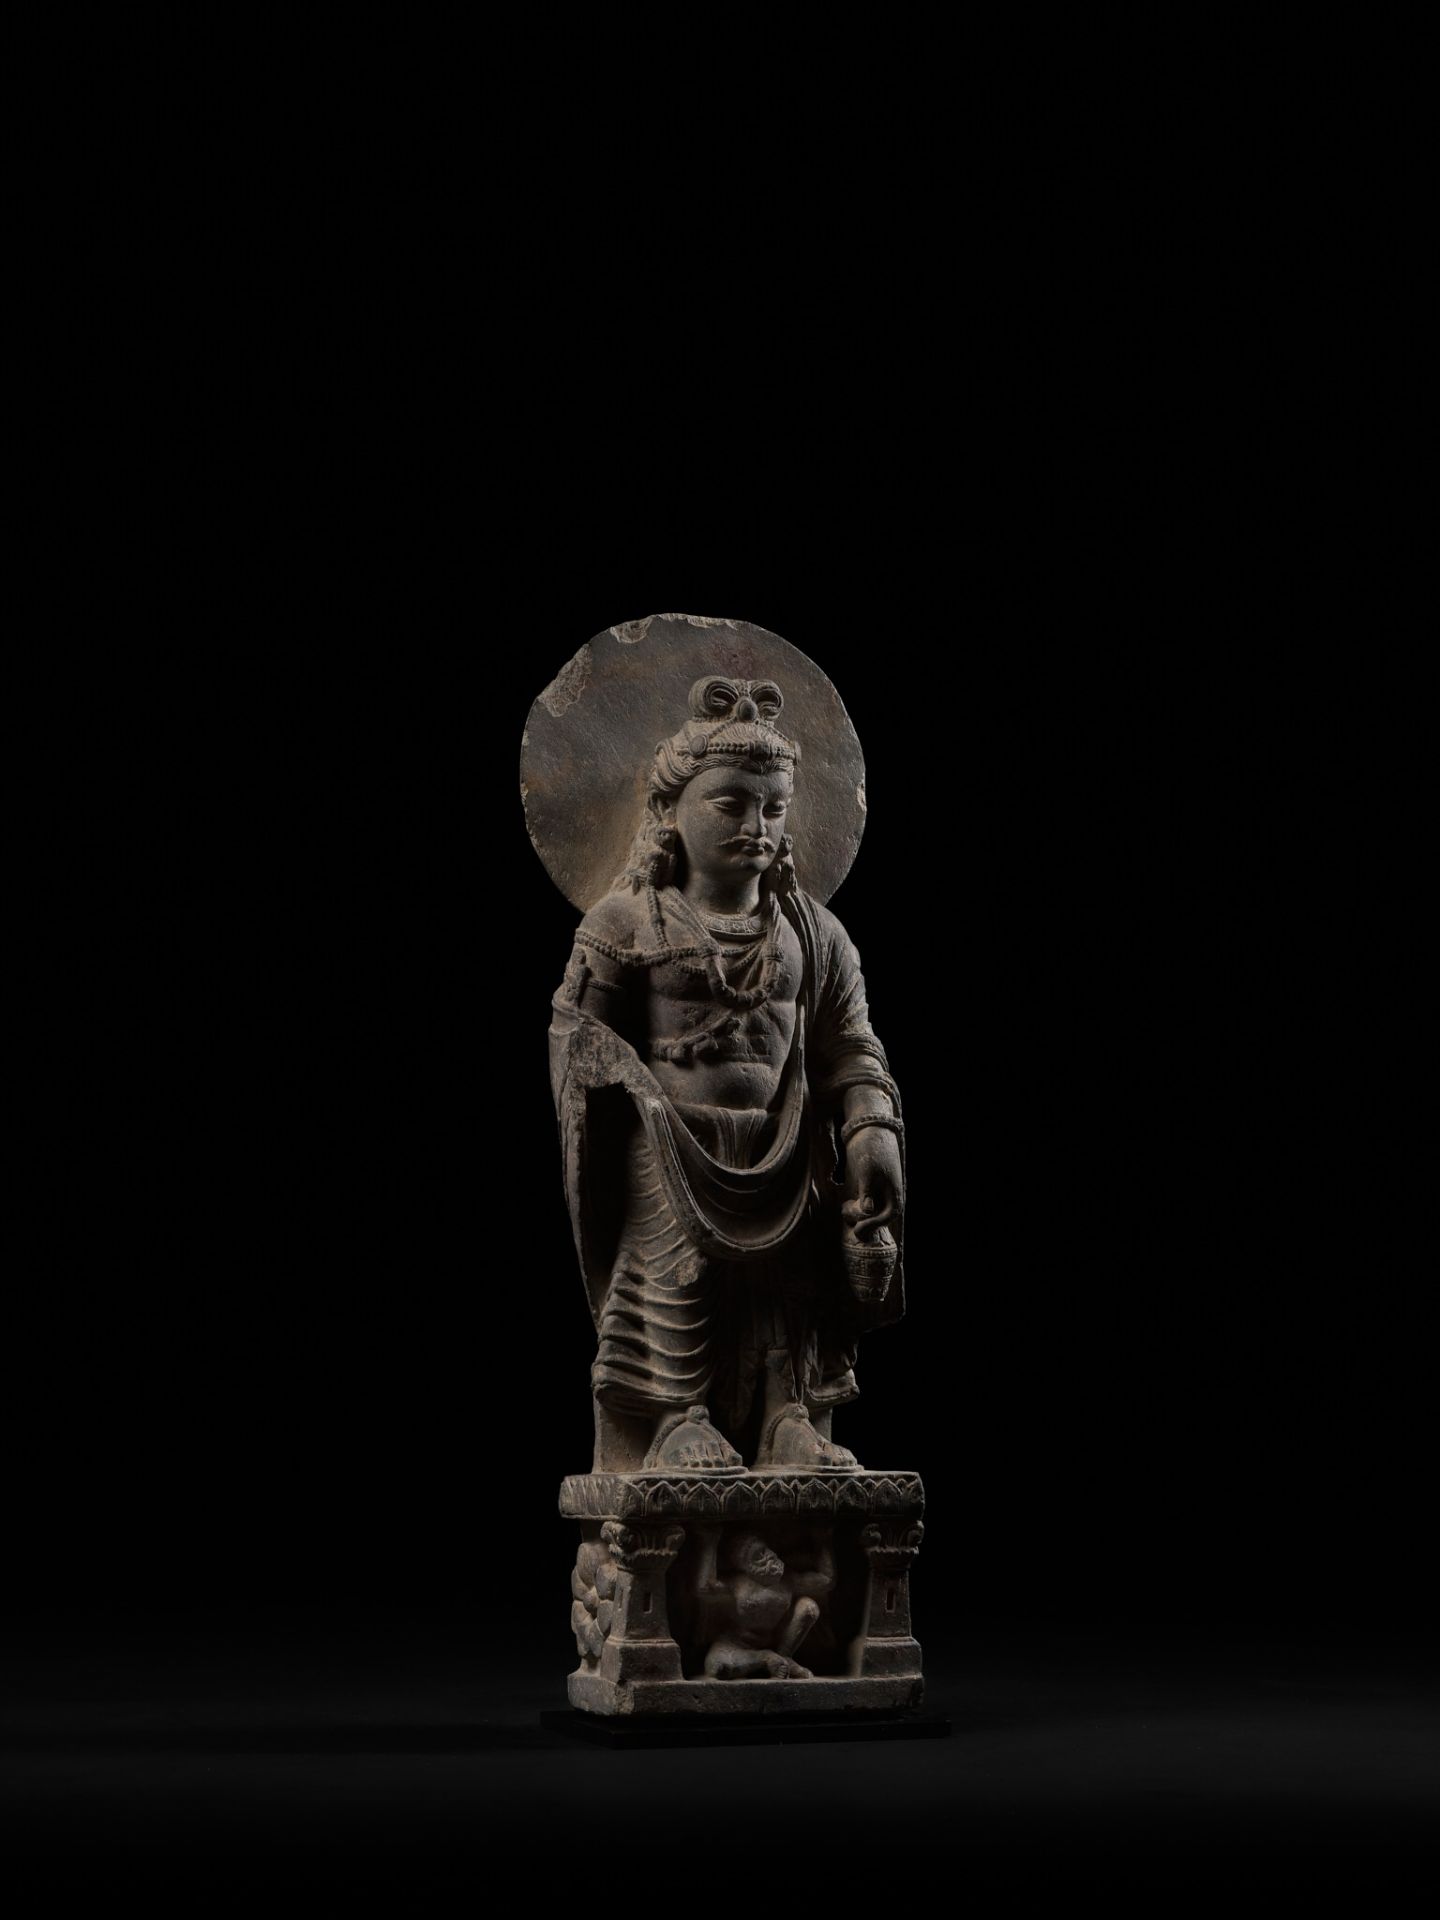 A LARGE SCHIST FIGURE OF MAITREYA WITH ATLAS, ANCIENT REGION OF GANDHARA - Image 8 of 12